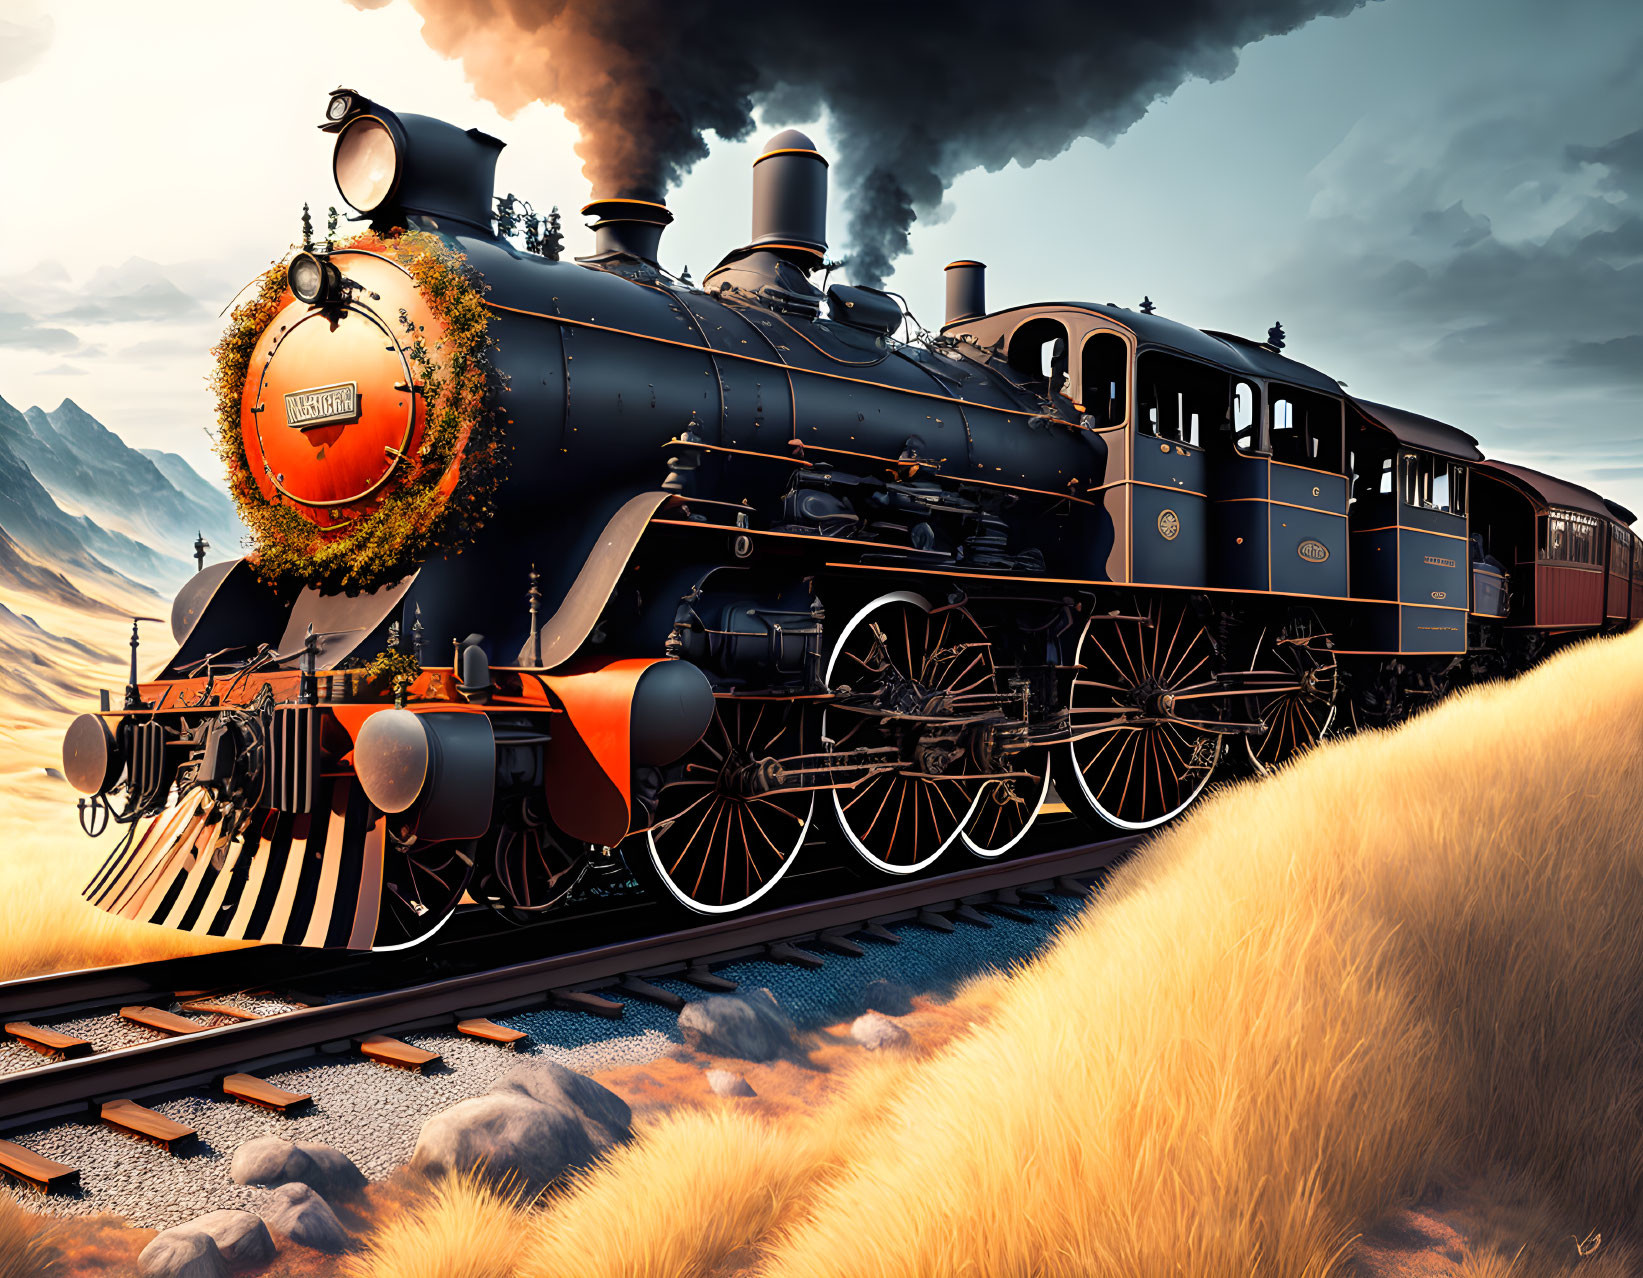 Vintage steam locomotive emitting smoke on tracks with orange wreath, against scenic backdrop of hills and sky